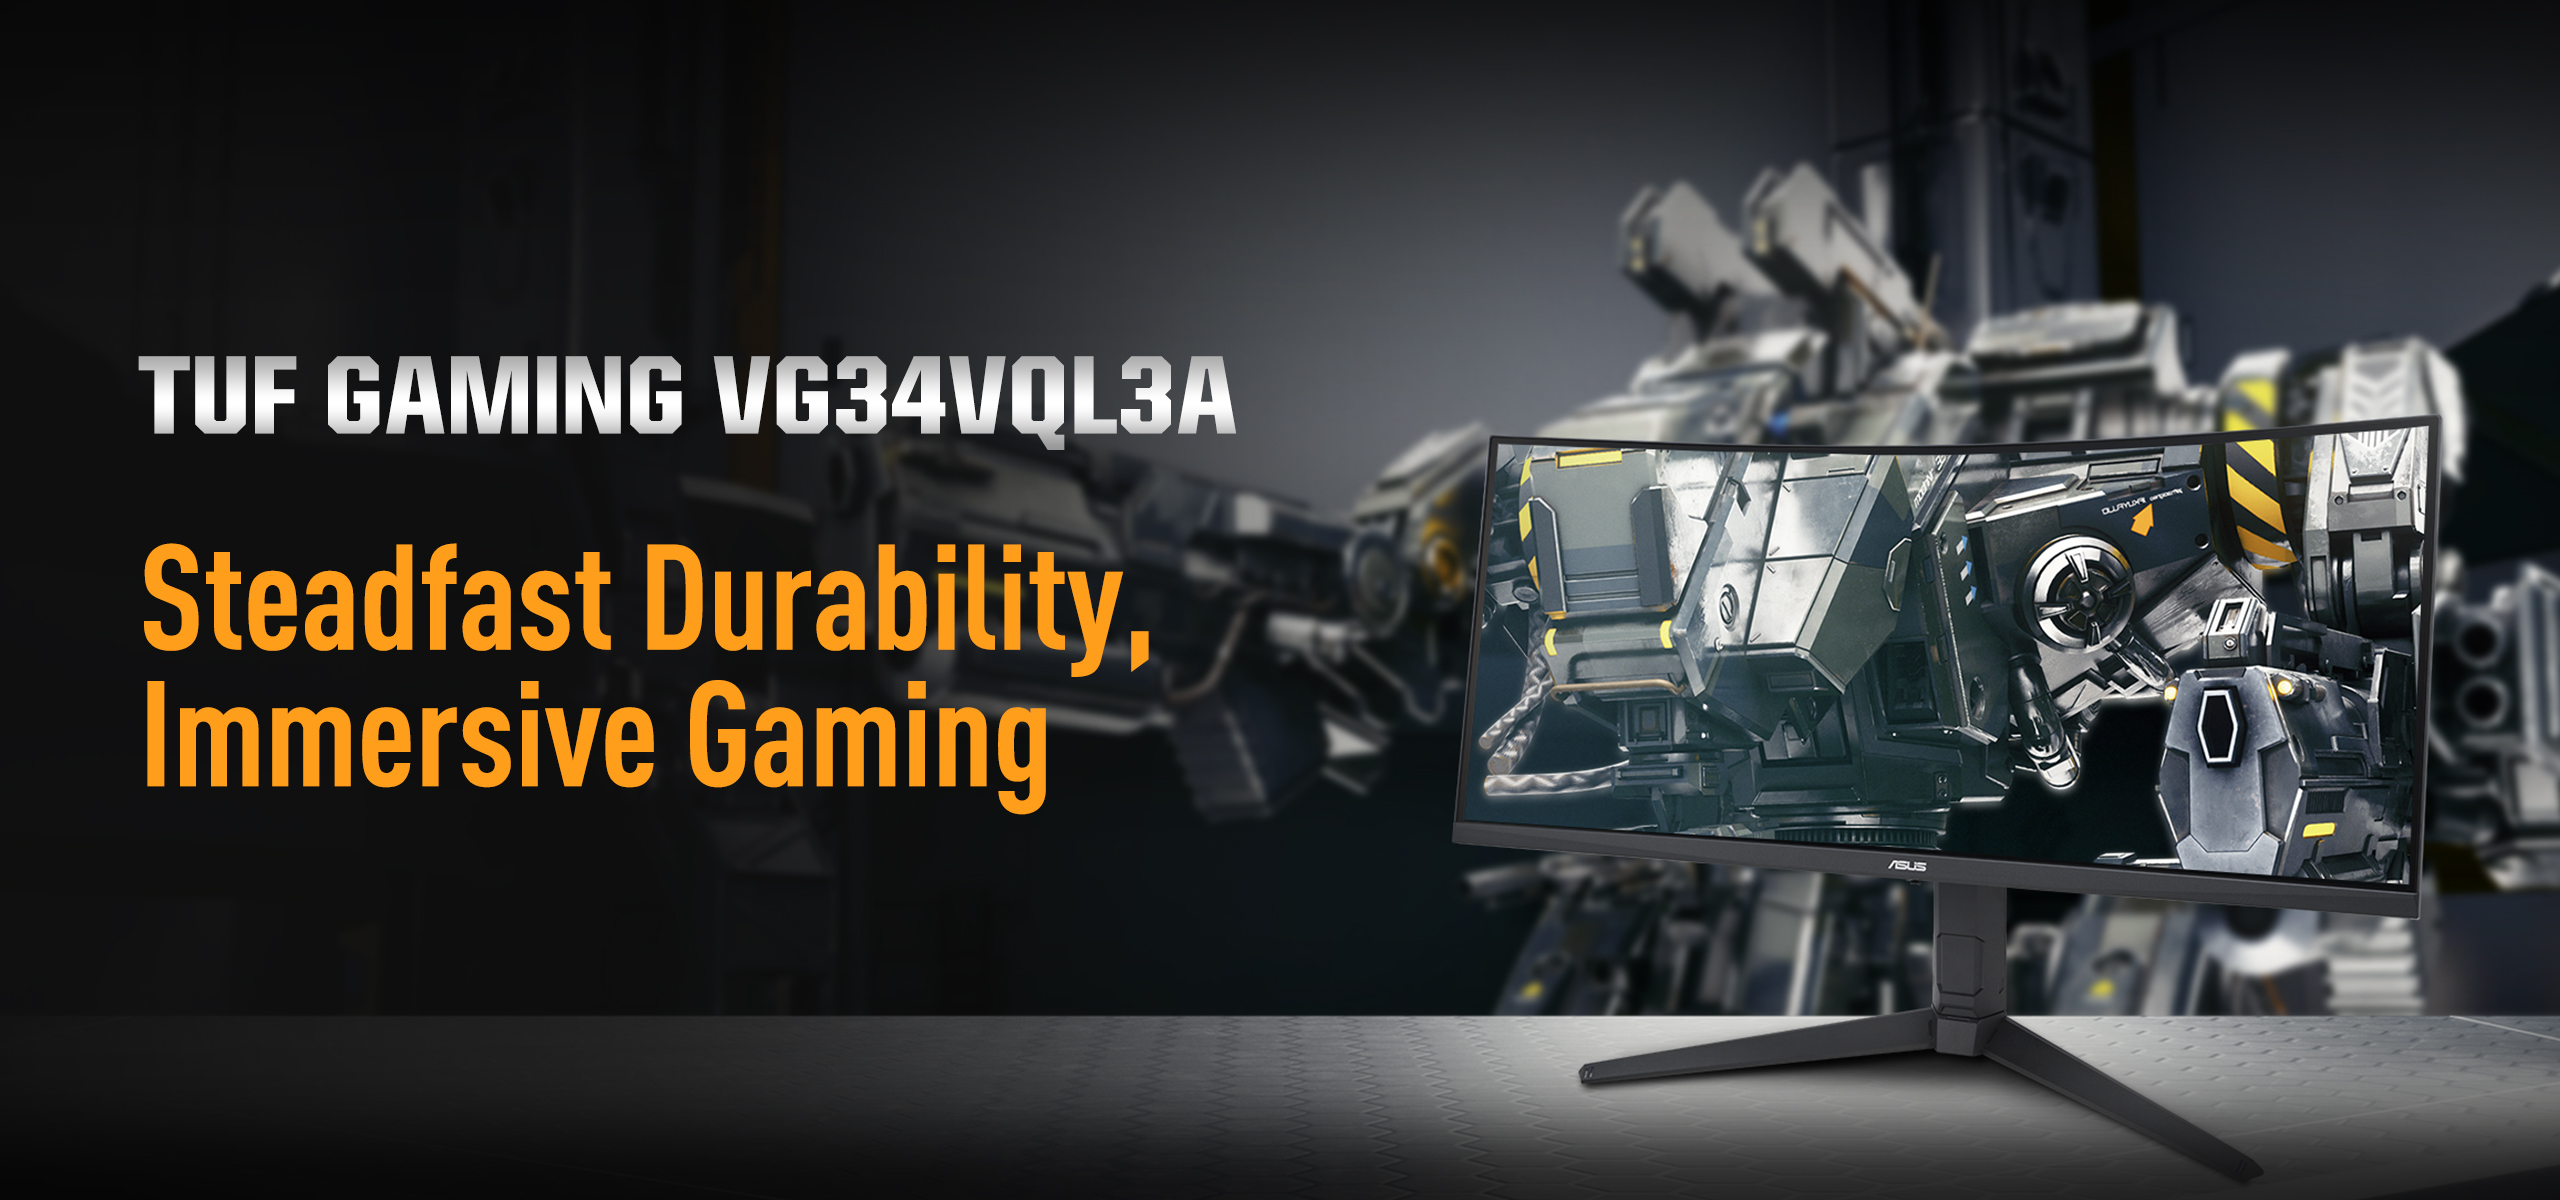 Key selling features of VG34VQEL1A